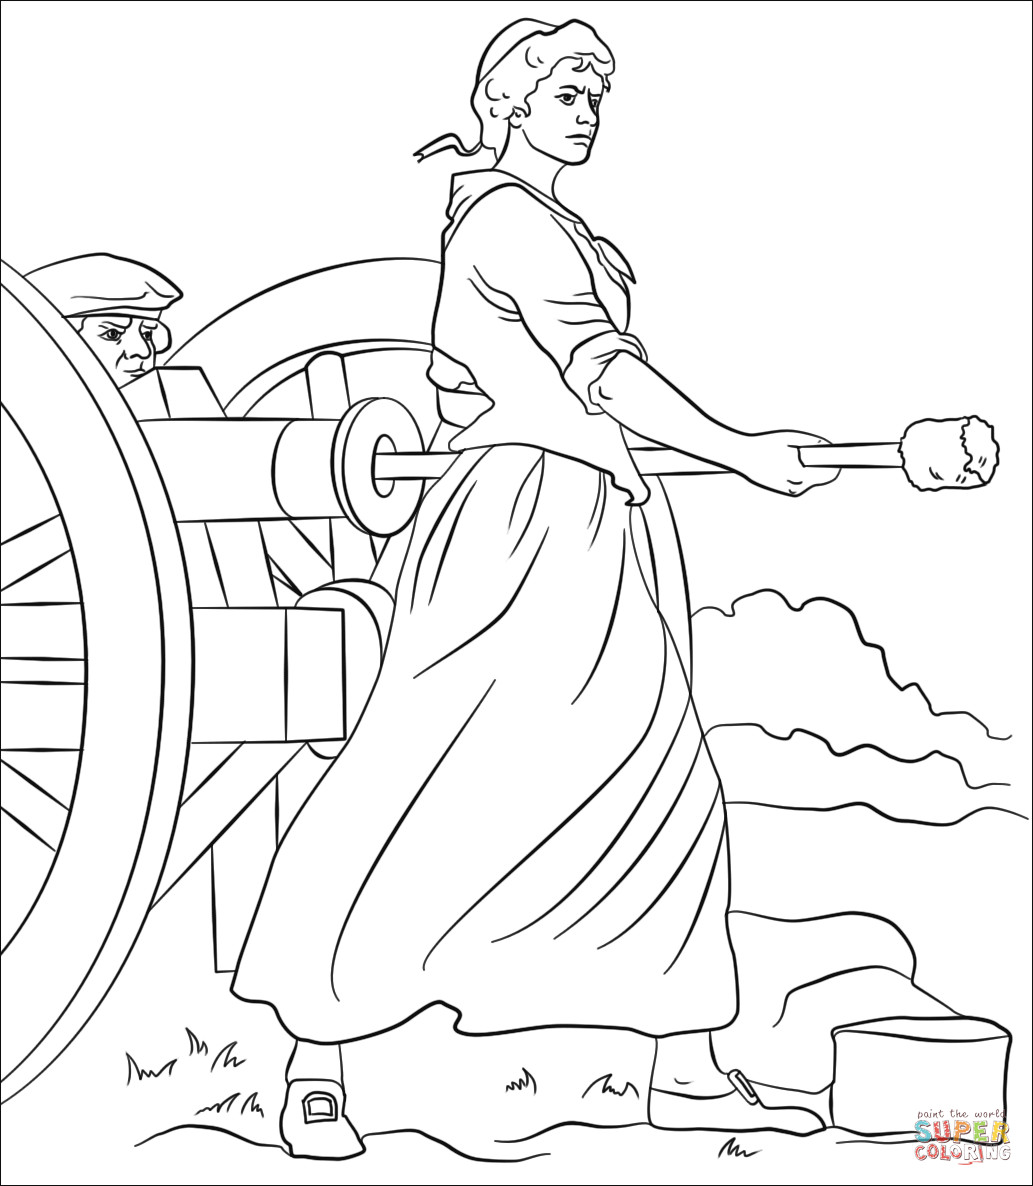 American Revolution Coloring Pages
 Molly Pitcher coloring page